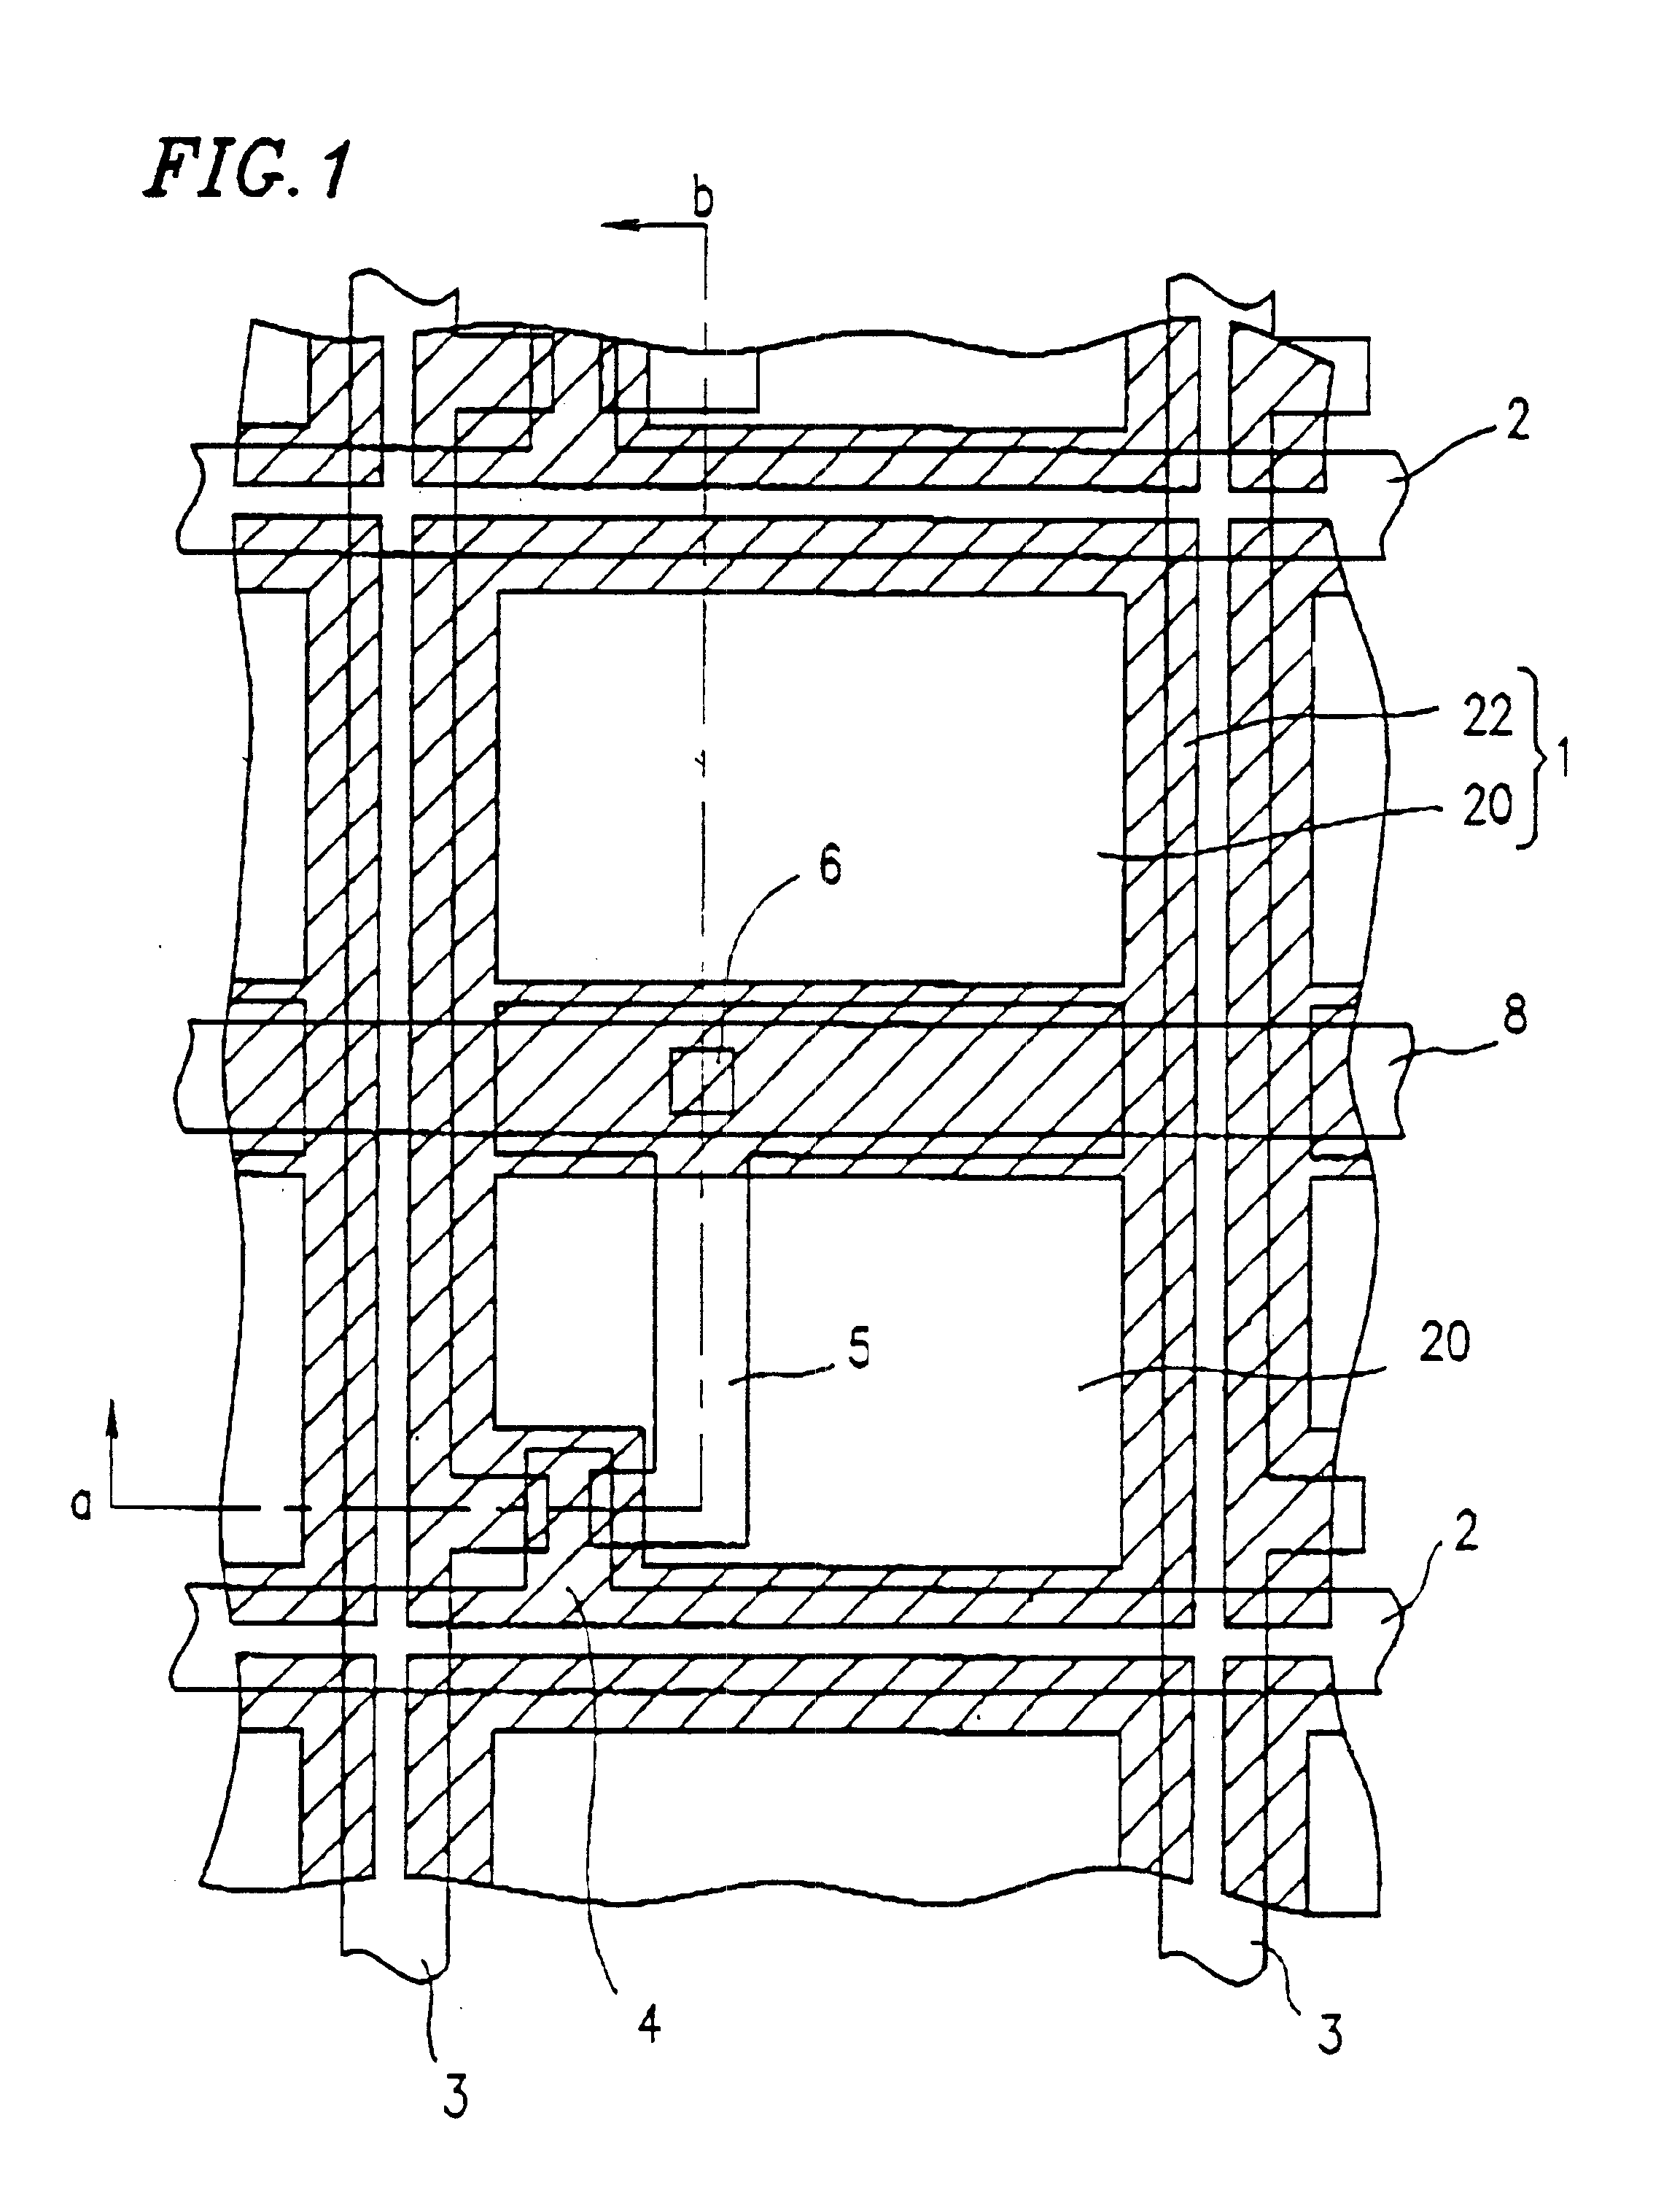 Liquid crystal display in which at least one pixel includes both a transmissive region and a reflective region